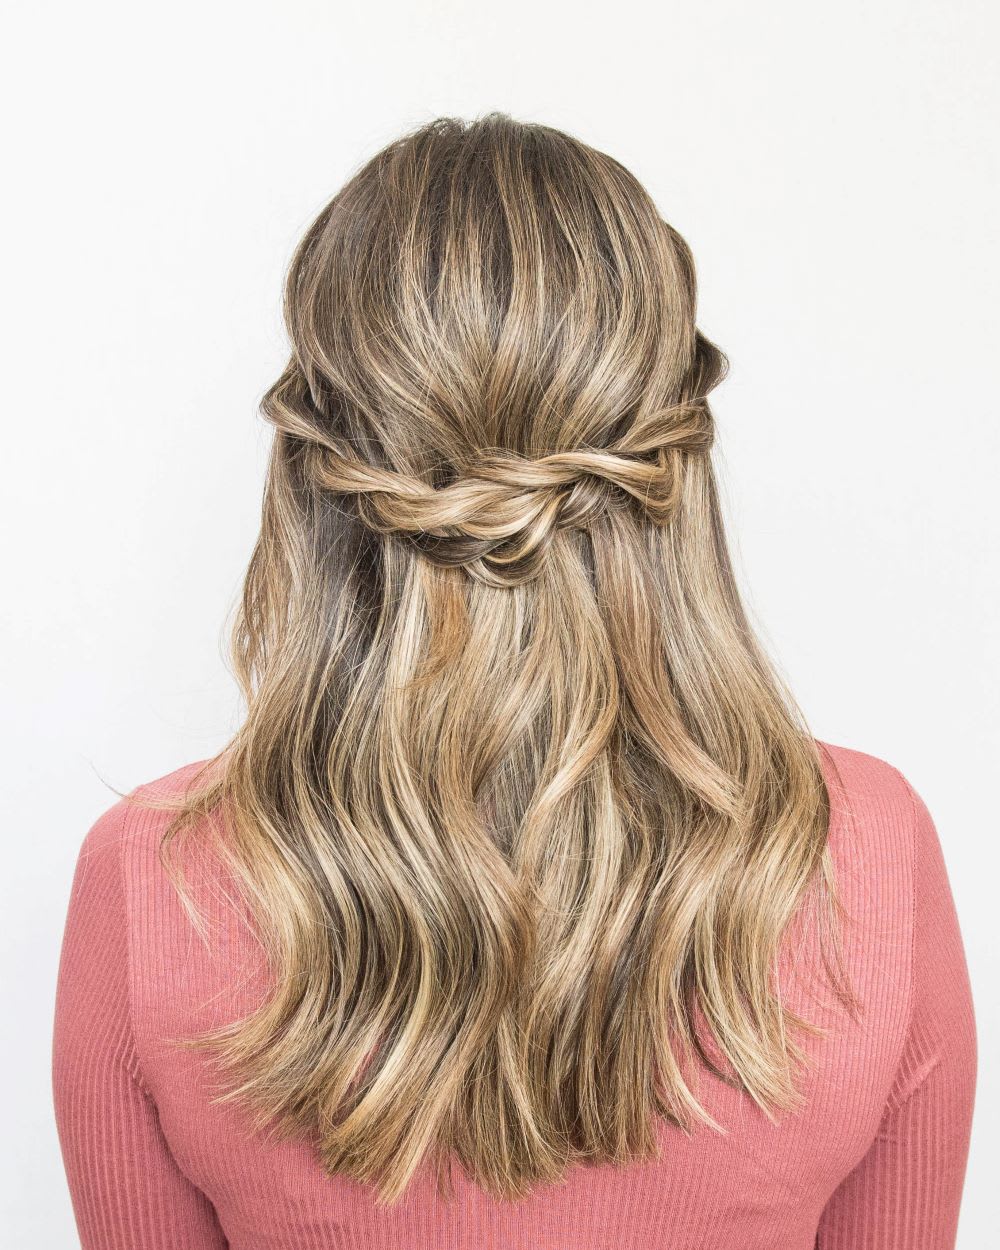 39 Prom Hair Styles Medium Hair Images, Stock Photos, 3D objects, & Vectors  | Shutterstock